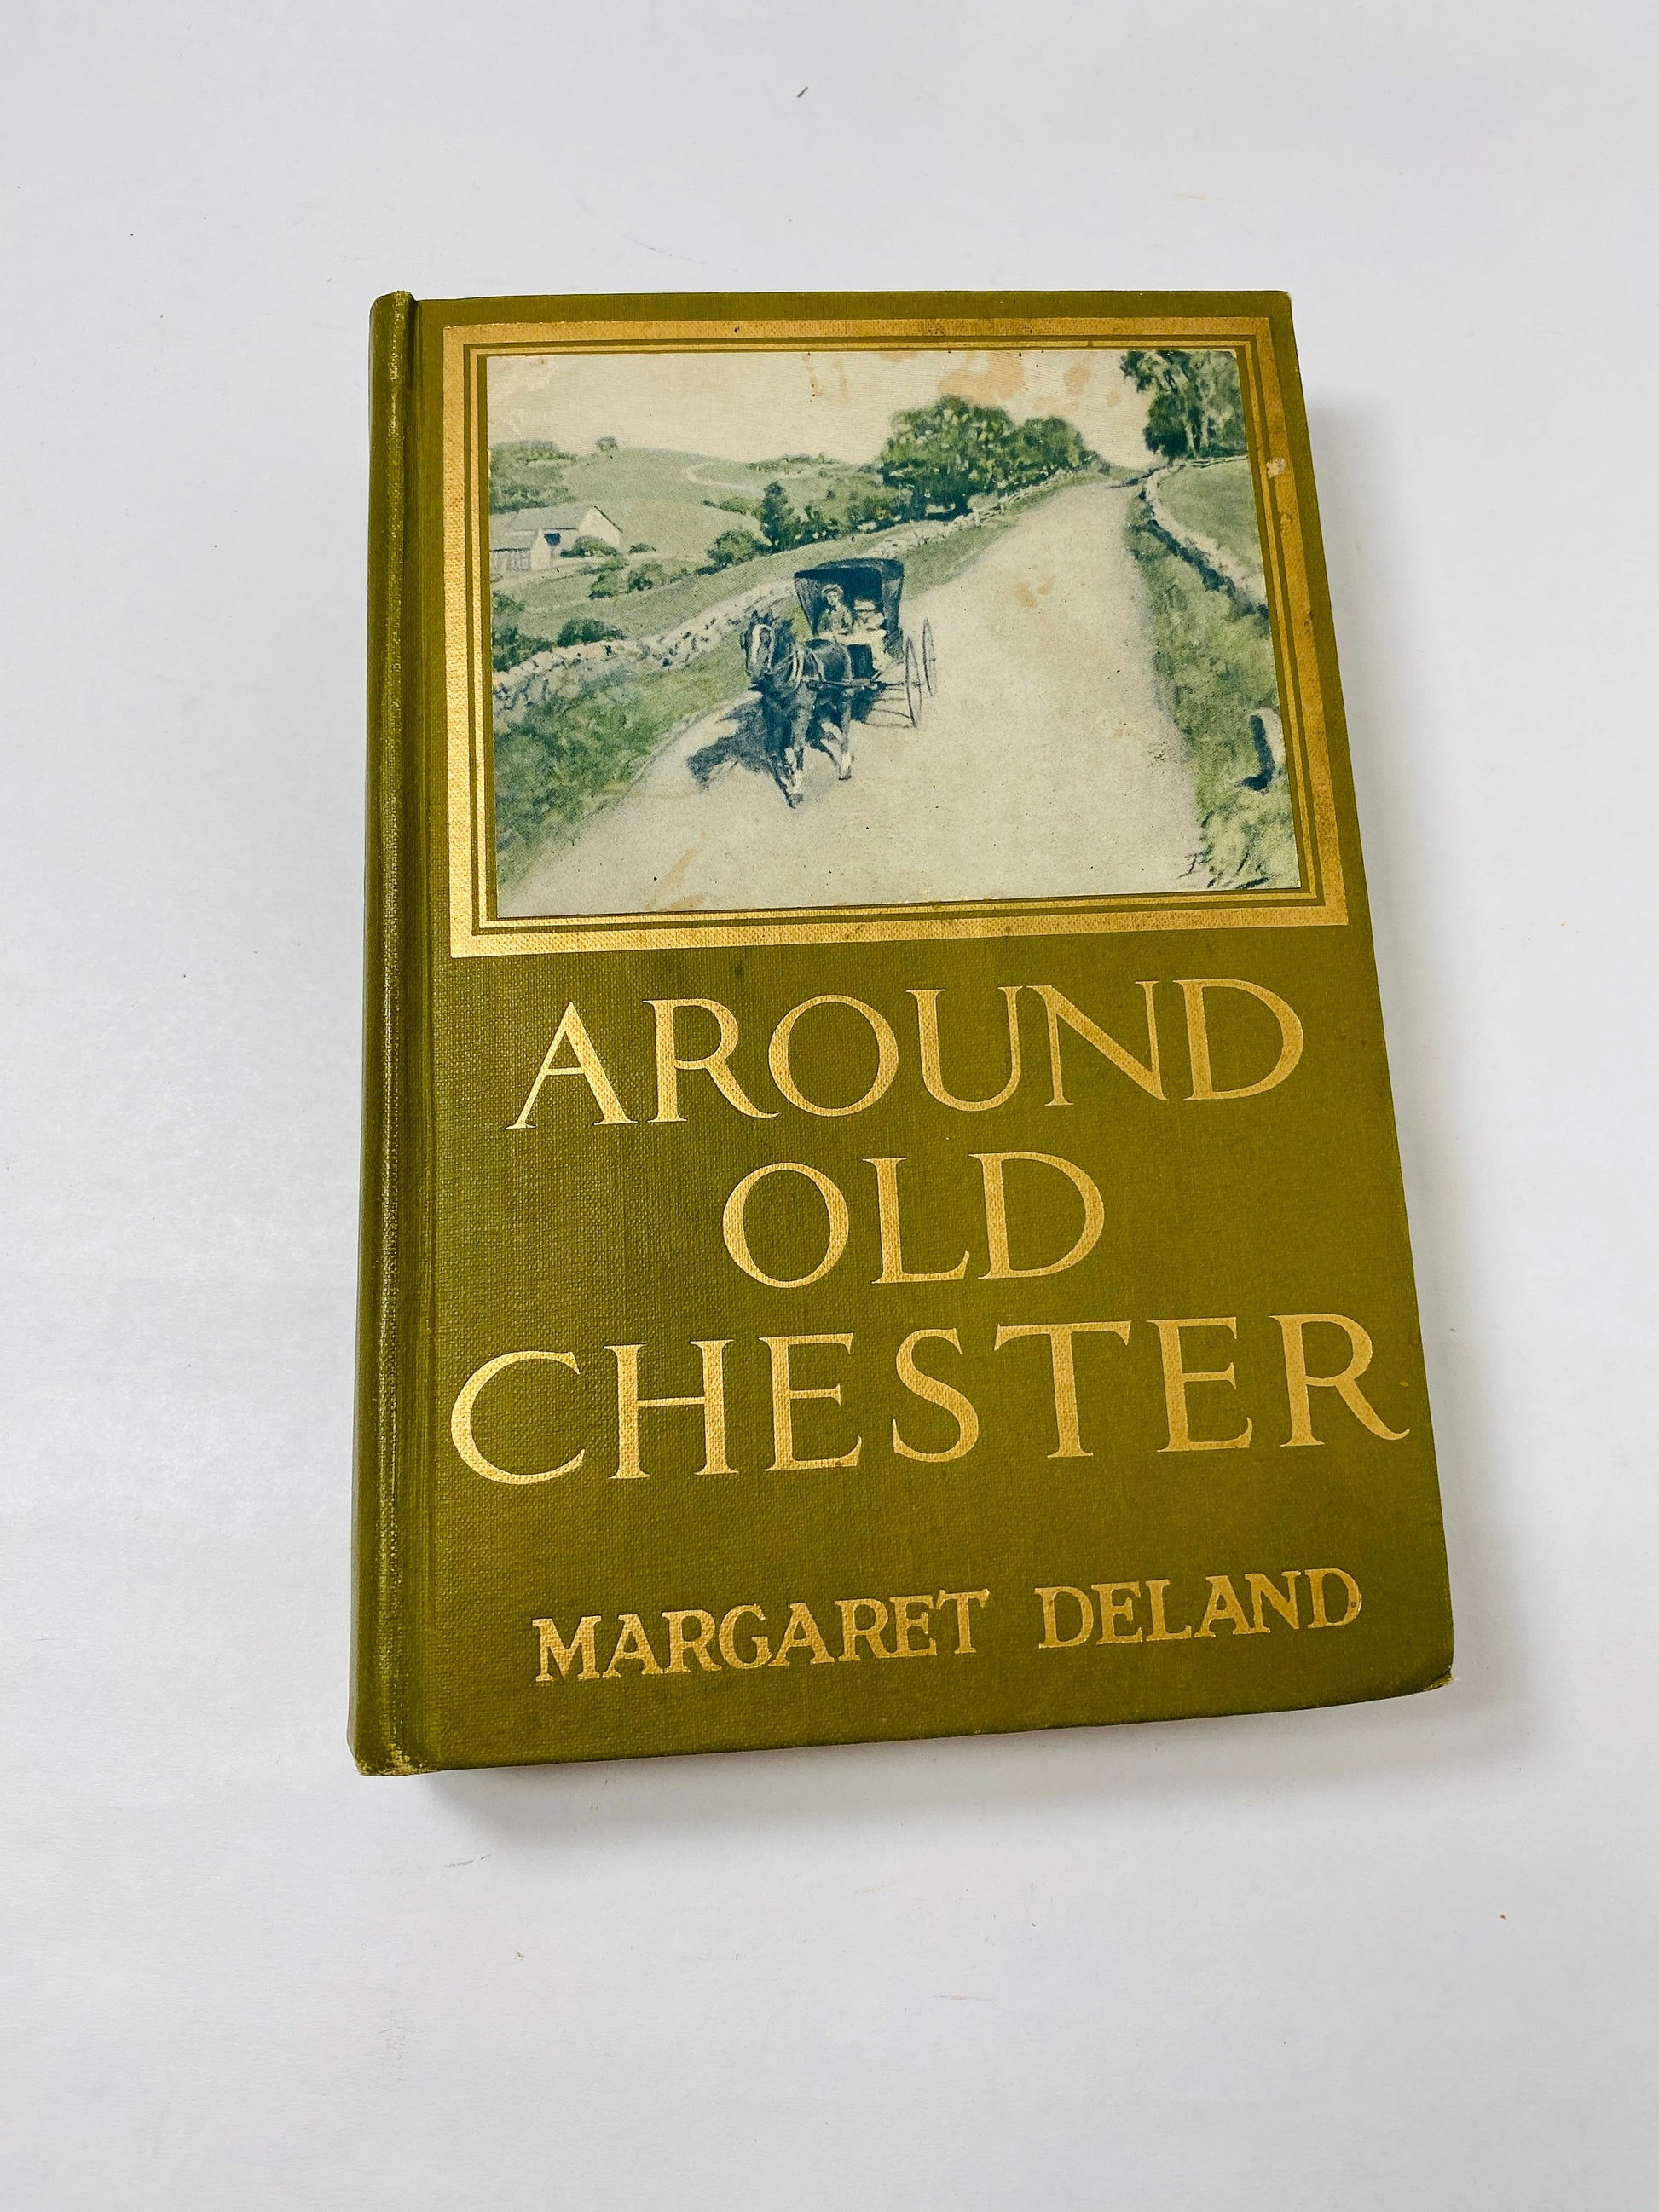 GORGEOUS olive green vintage book embossed in gold. Around Old Chester by Margaret Deland circa 1915 Boston Women's Heritage Trail